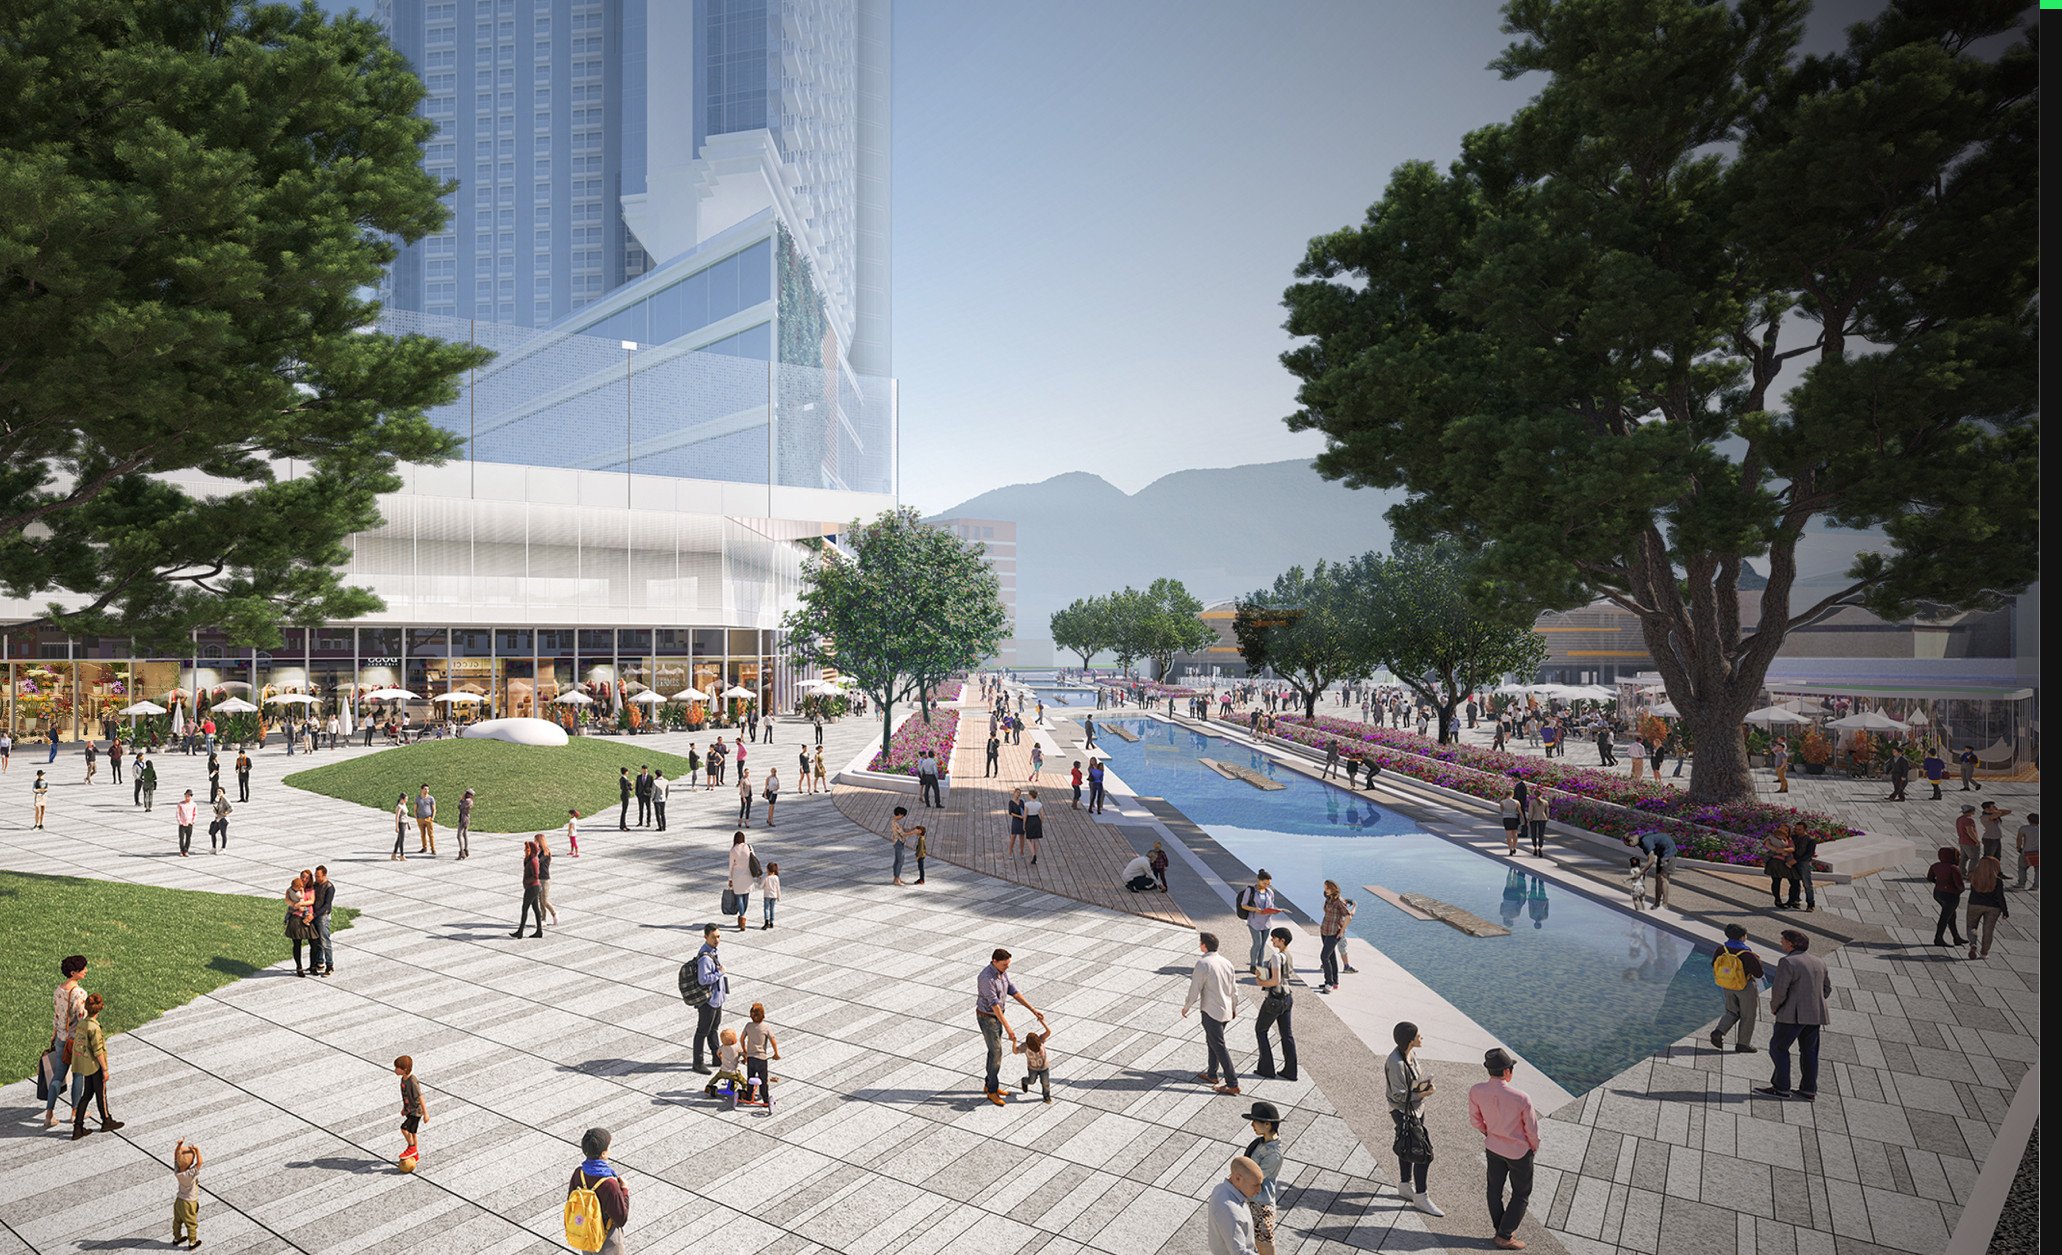 An artist’s impression of the Flower Market and Sai Yee Street in Mong Kong after redeveopment. Image: URA